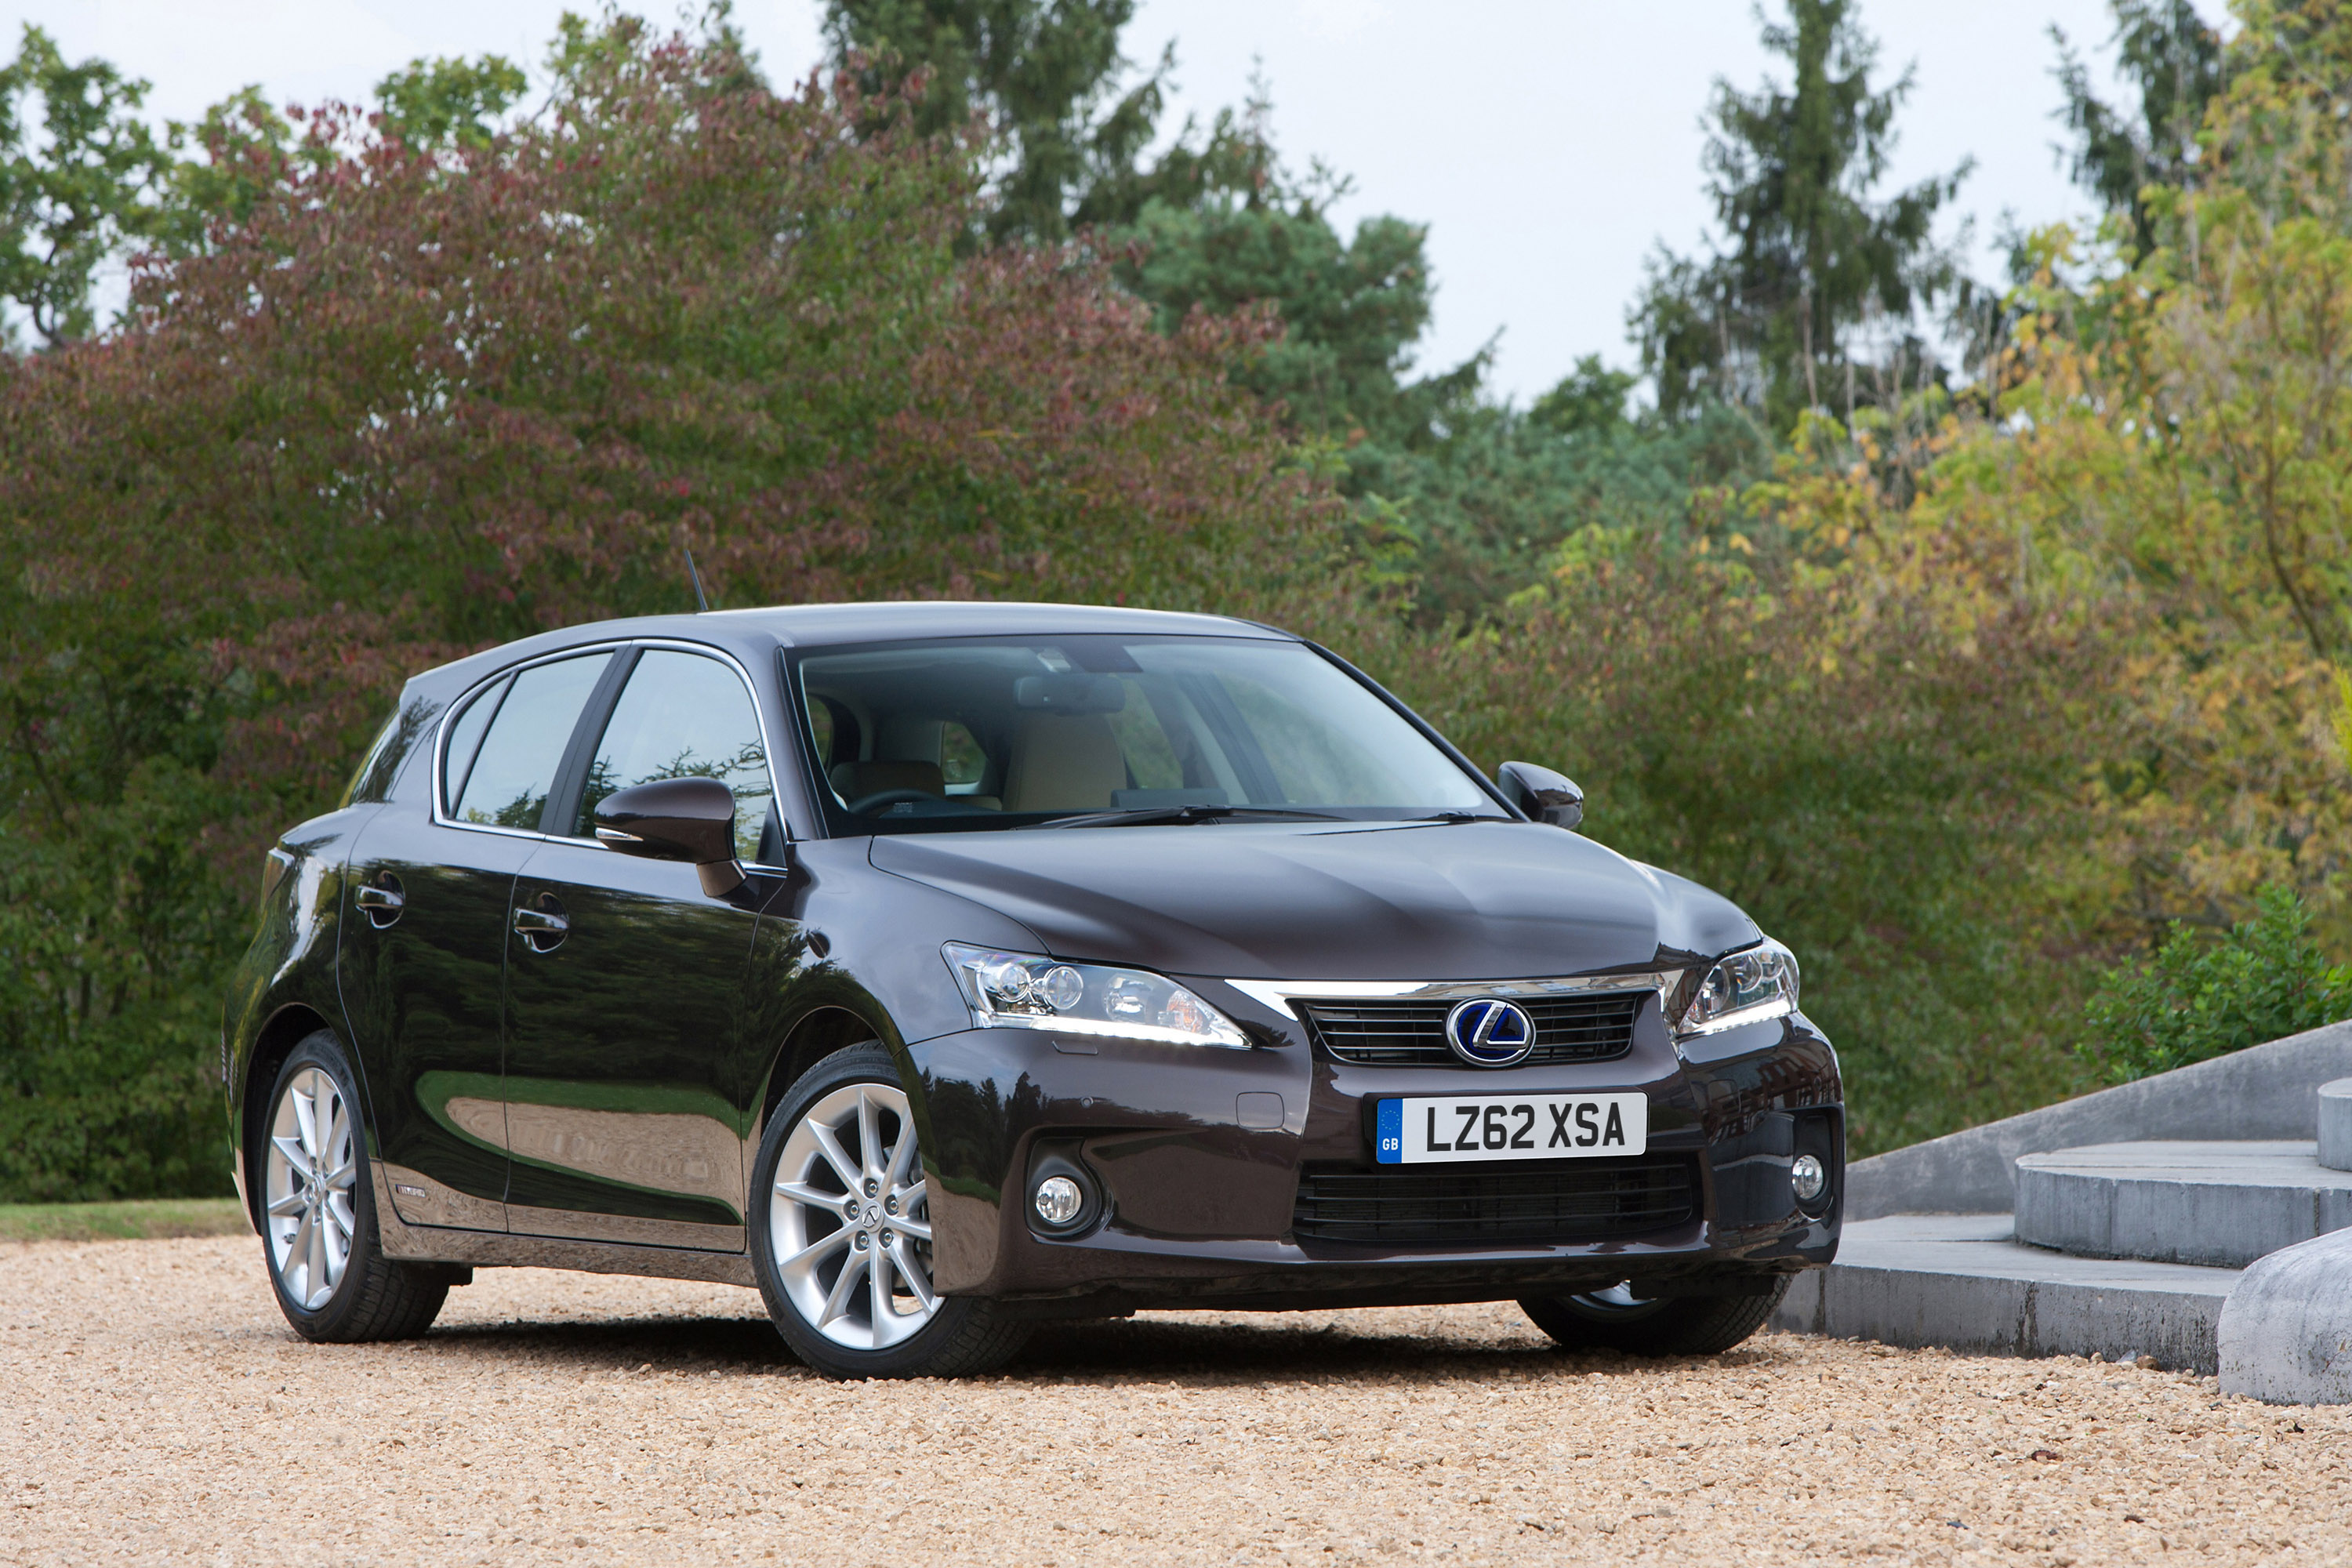 Research 2013
                  LEXUS CT pictures, prices and reviews